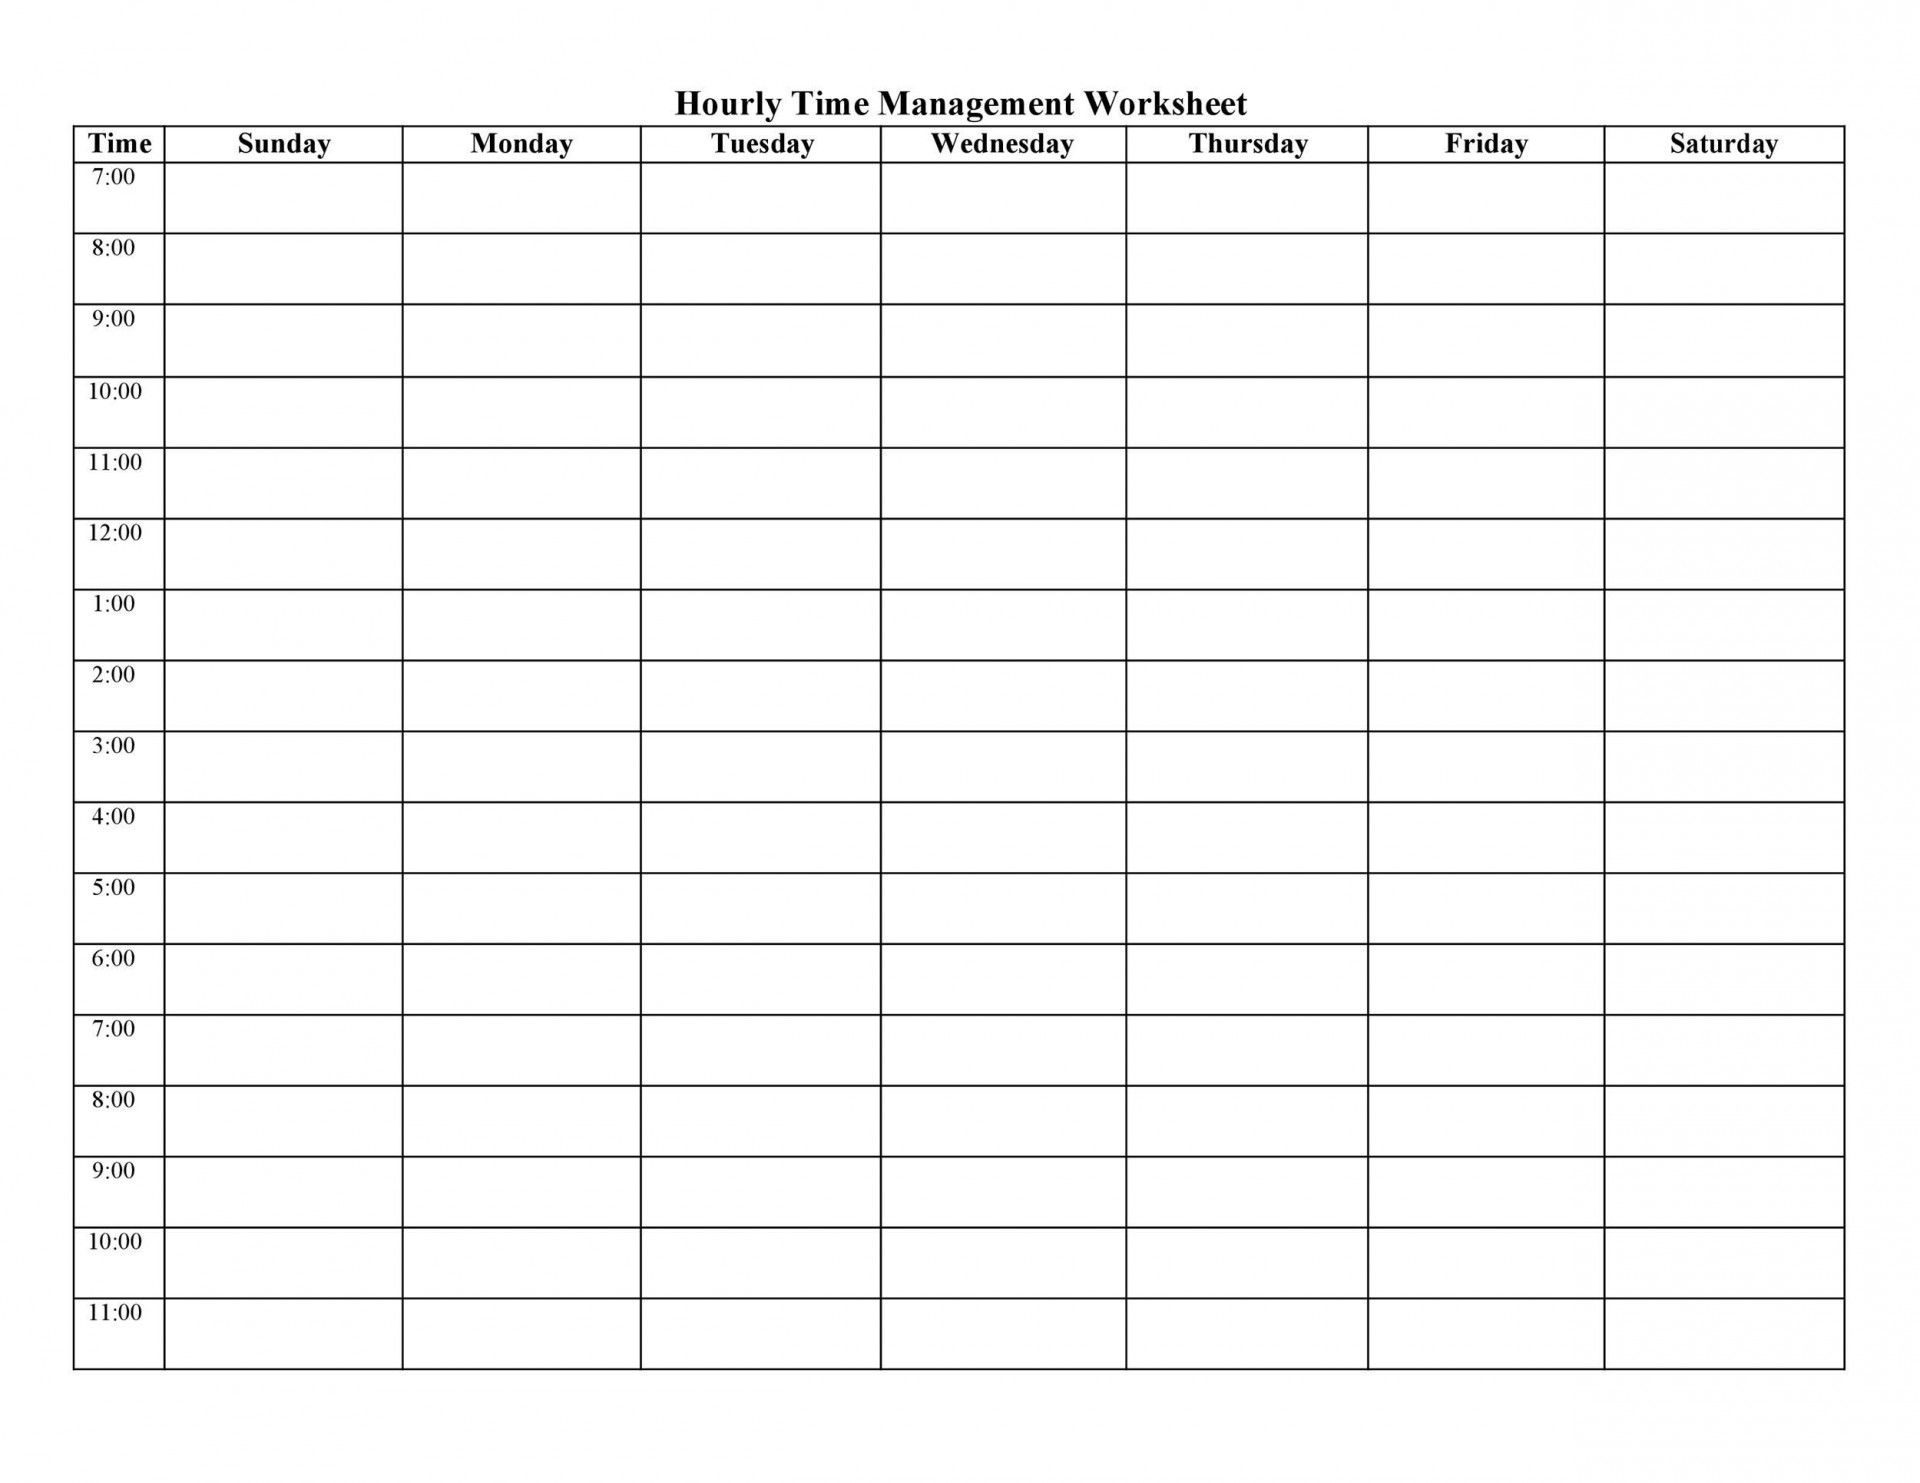 free-7-day-24-hour-schedule-example-calendar-printable